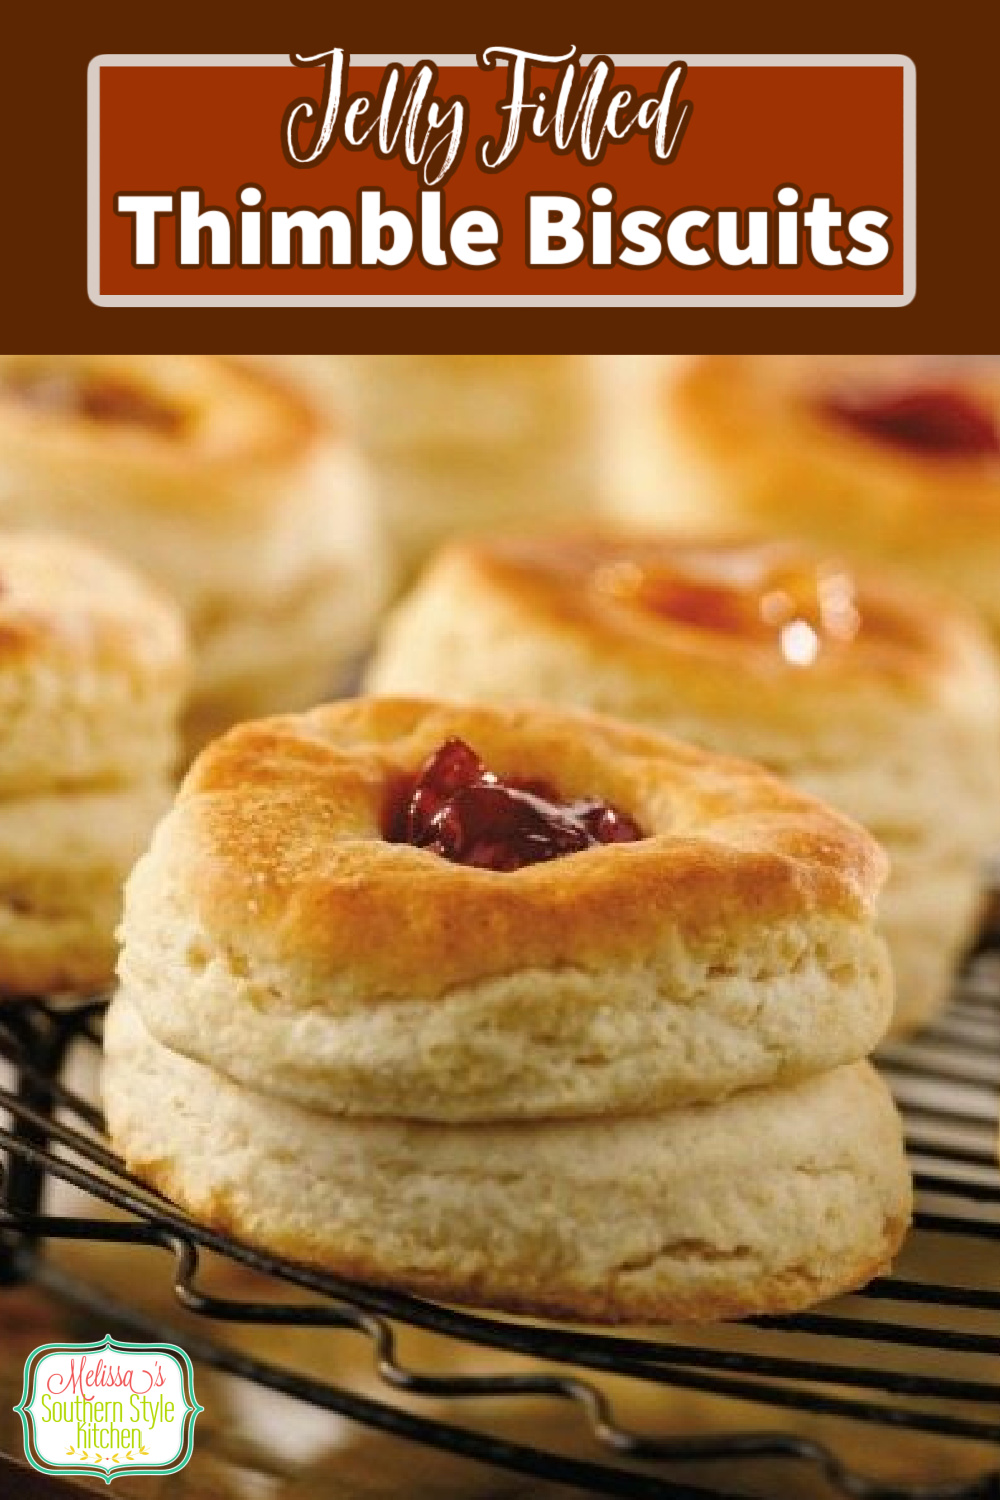 Thimble biscuits are buttermilk biscuits, filled with your favorite flavor of jam. It's a fun way to shake-up the house bread of the South. #thimblebiscuits #buttermilkbiscuits #jambiscuits #biscuitrecipes #southernbiscuits #brunch #breakfast #holidaybrunch #southernfood #southernrecipes